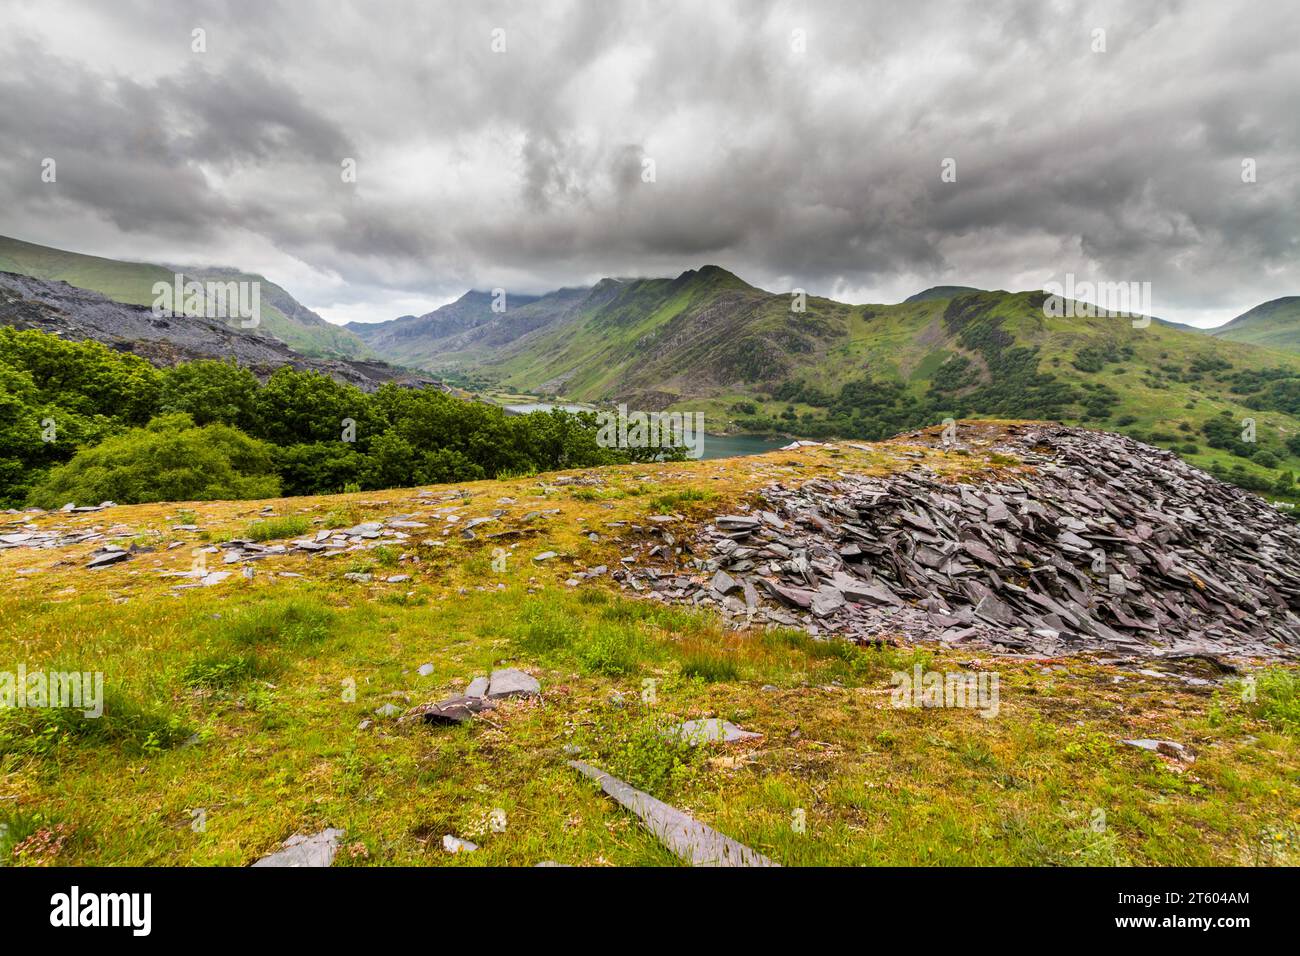 View of Llanberis and the nant Peris pass from Dinorwic slate quarry in Snowdonia or Eryri National Park, North Wales, UK, landscape Stock Photo